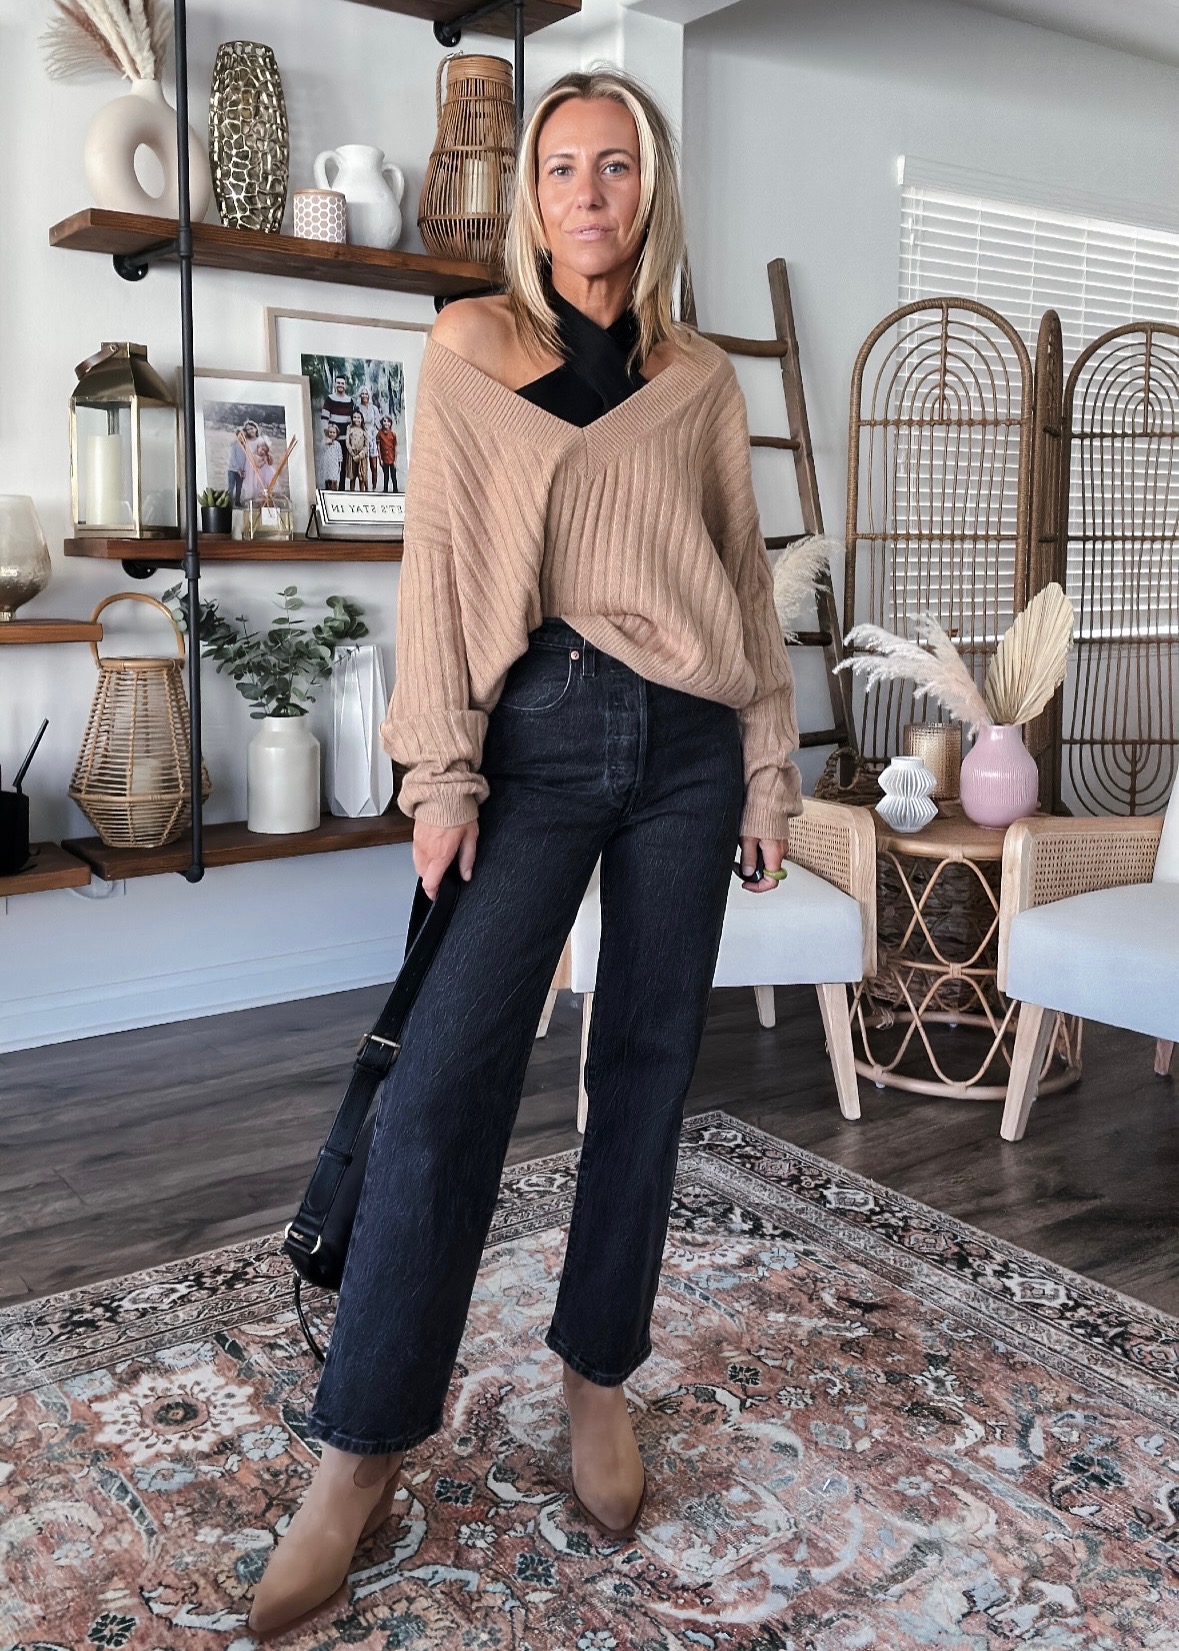 Nordstom Sale-Items Still in Stock-Jaclyn De Leon style. Check out all my looks from the Nordstom sale that are still in stock. Nordstrom has a great collection of sweaters and jackets that are perfect to pair with their jeans and boots for fall.